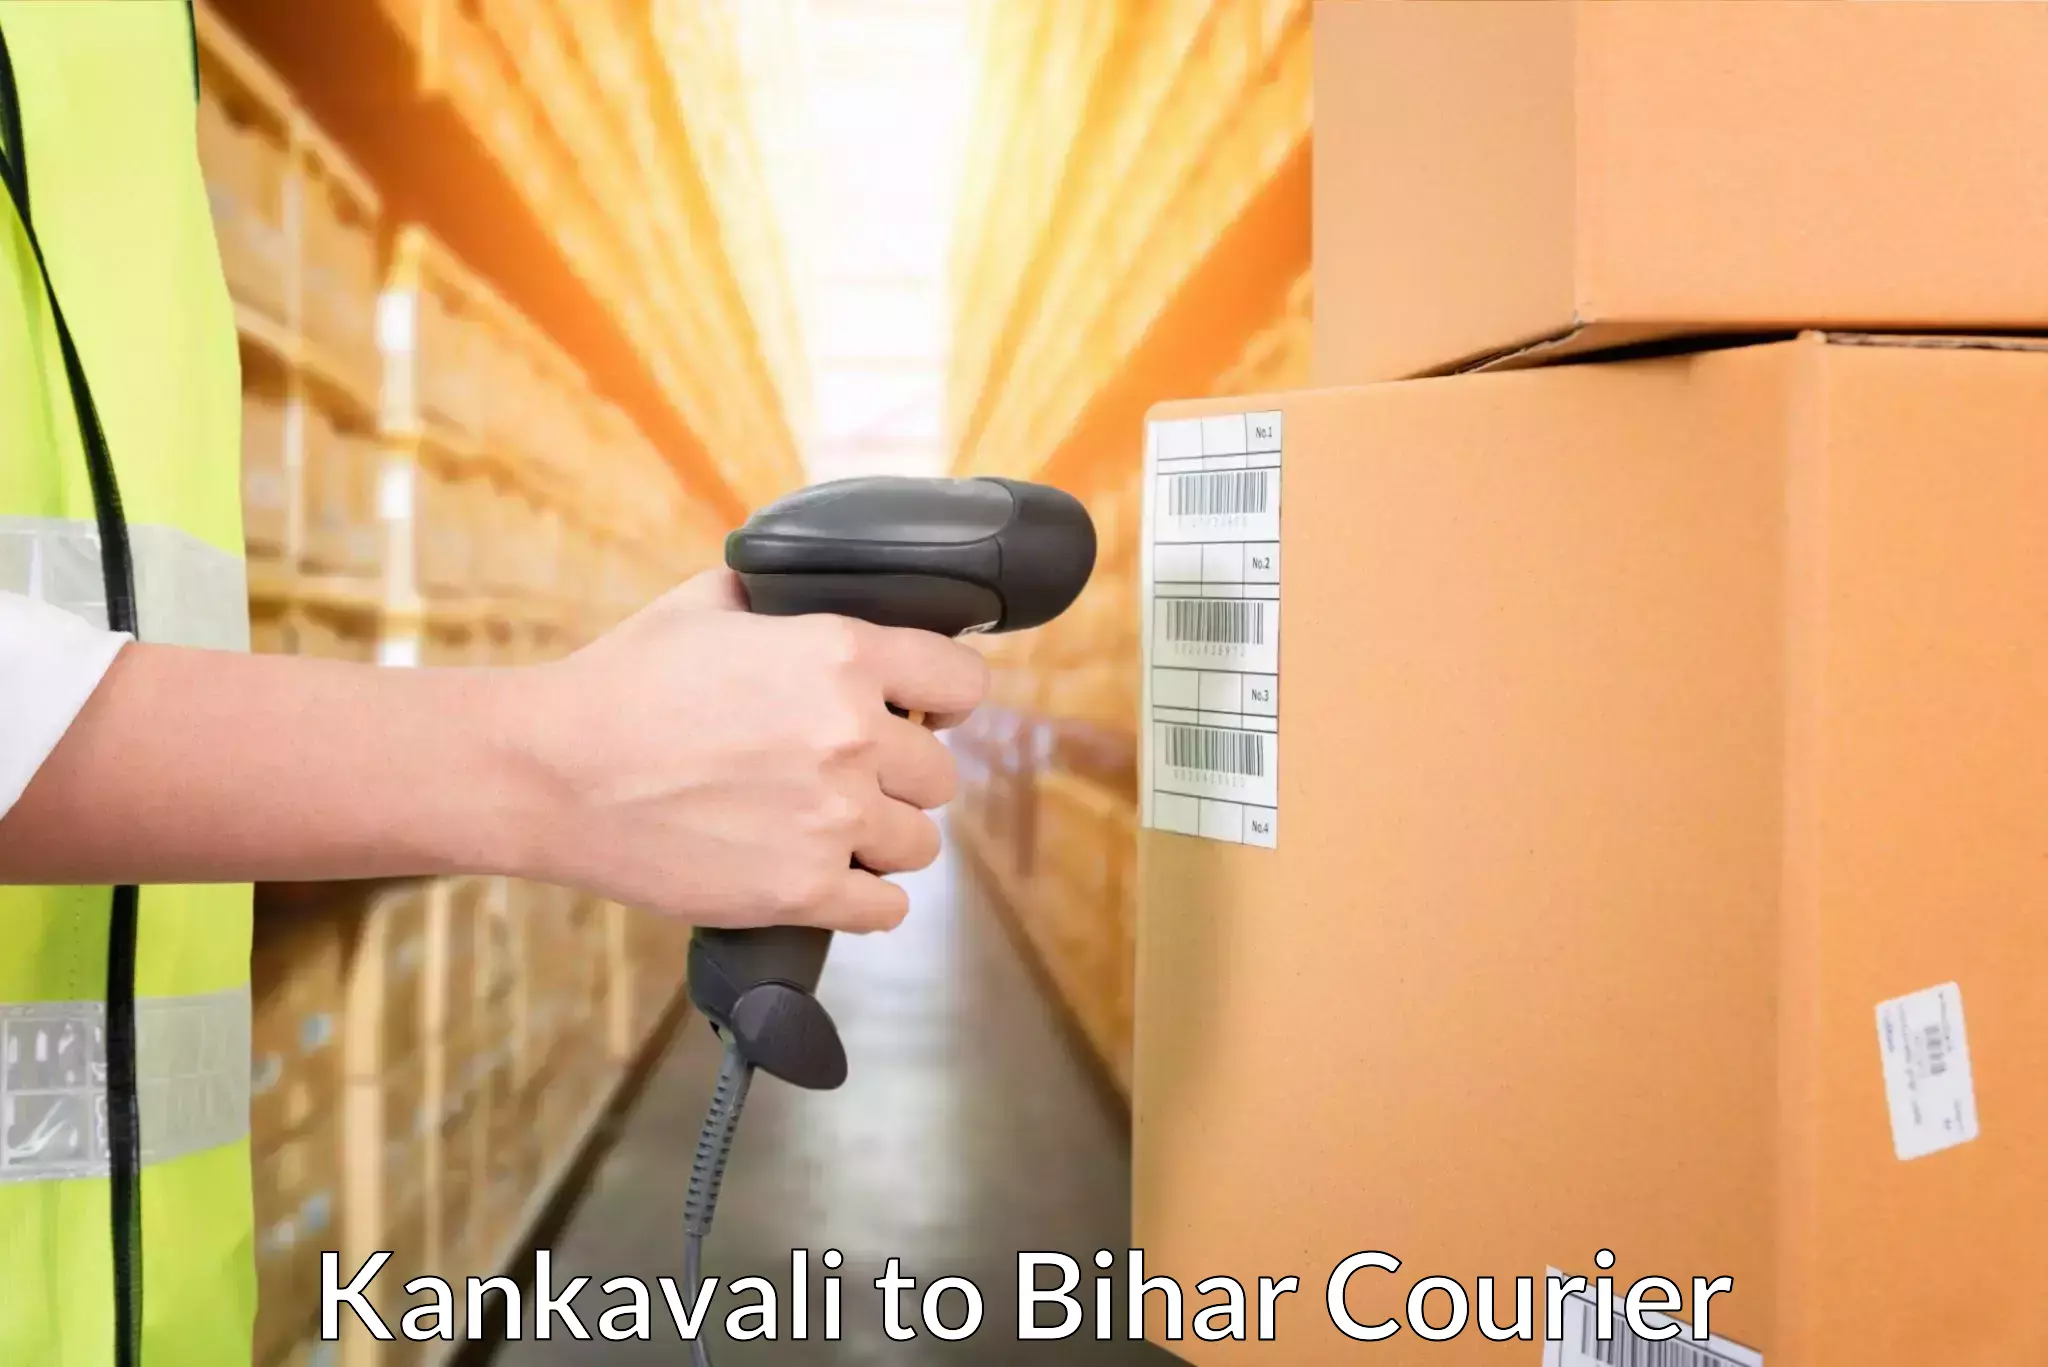 User-friendly delivery service Kankavali to Bihar